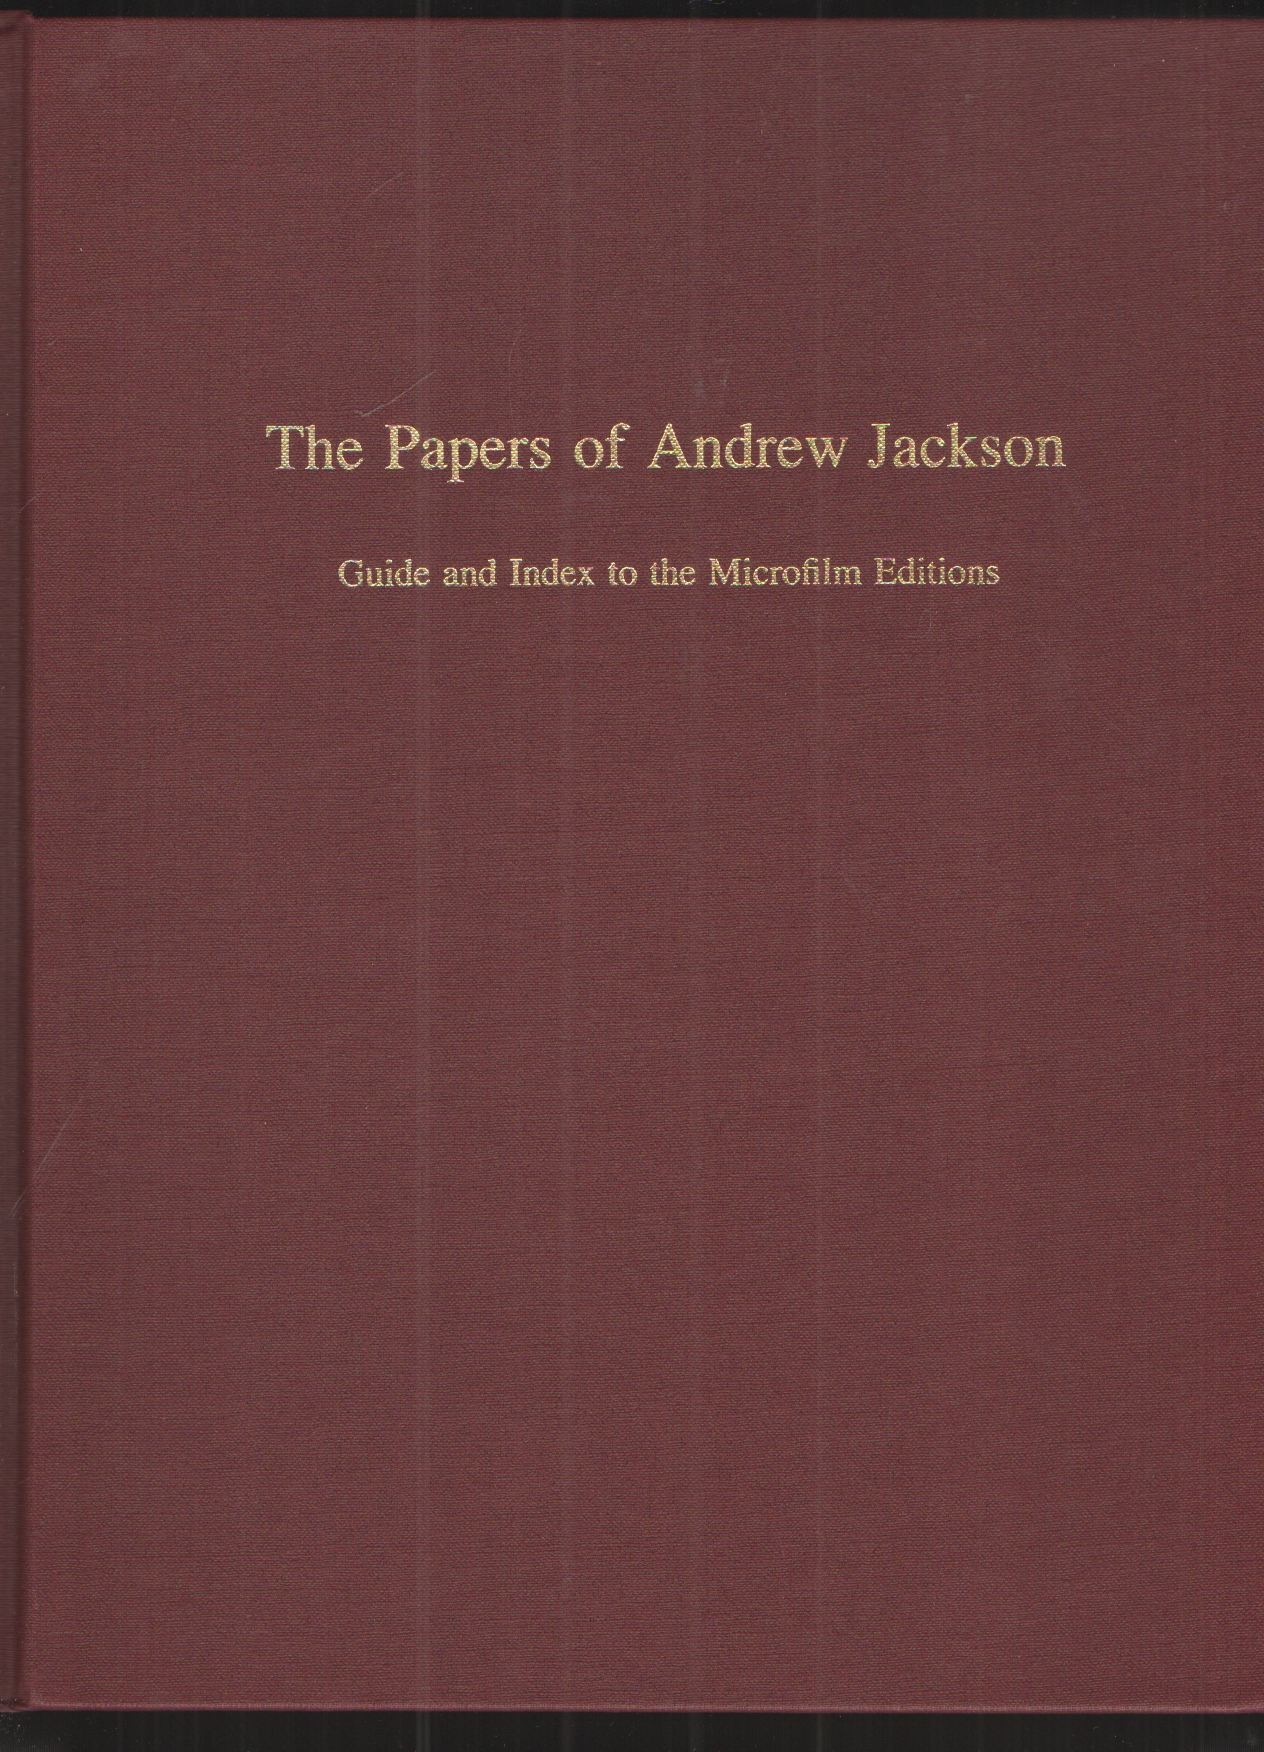 Image for The Papers of Andrew Jackson Guide and Index to the Microfilm Editions